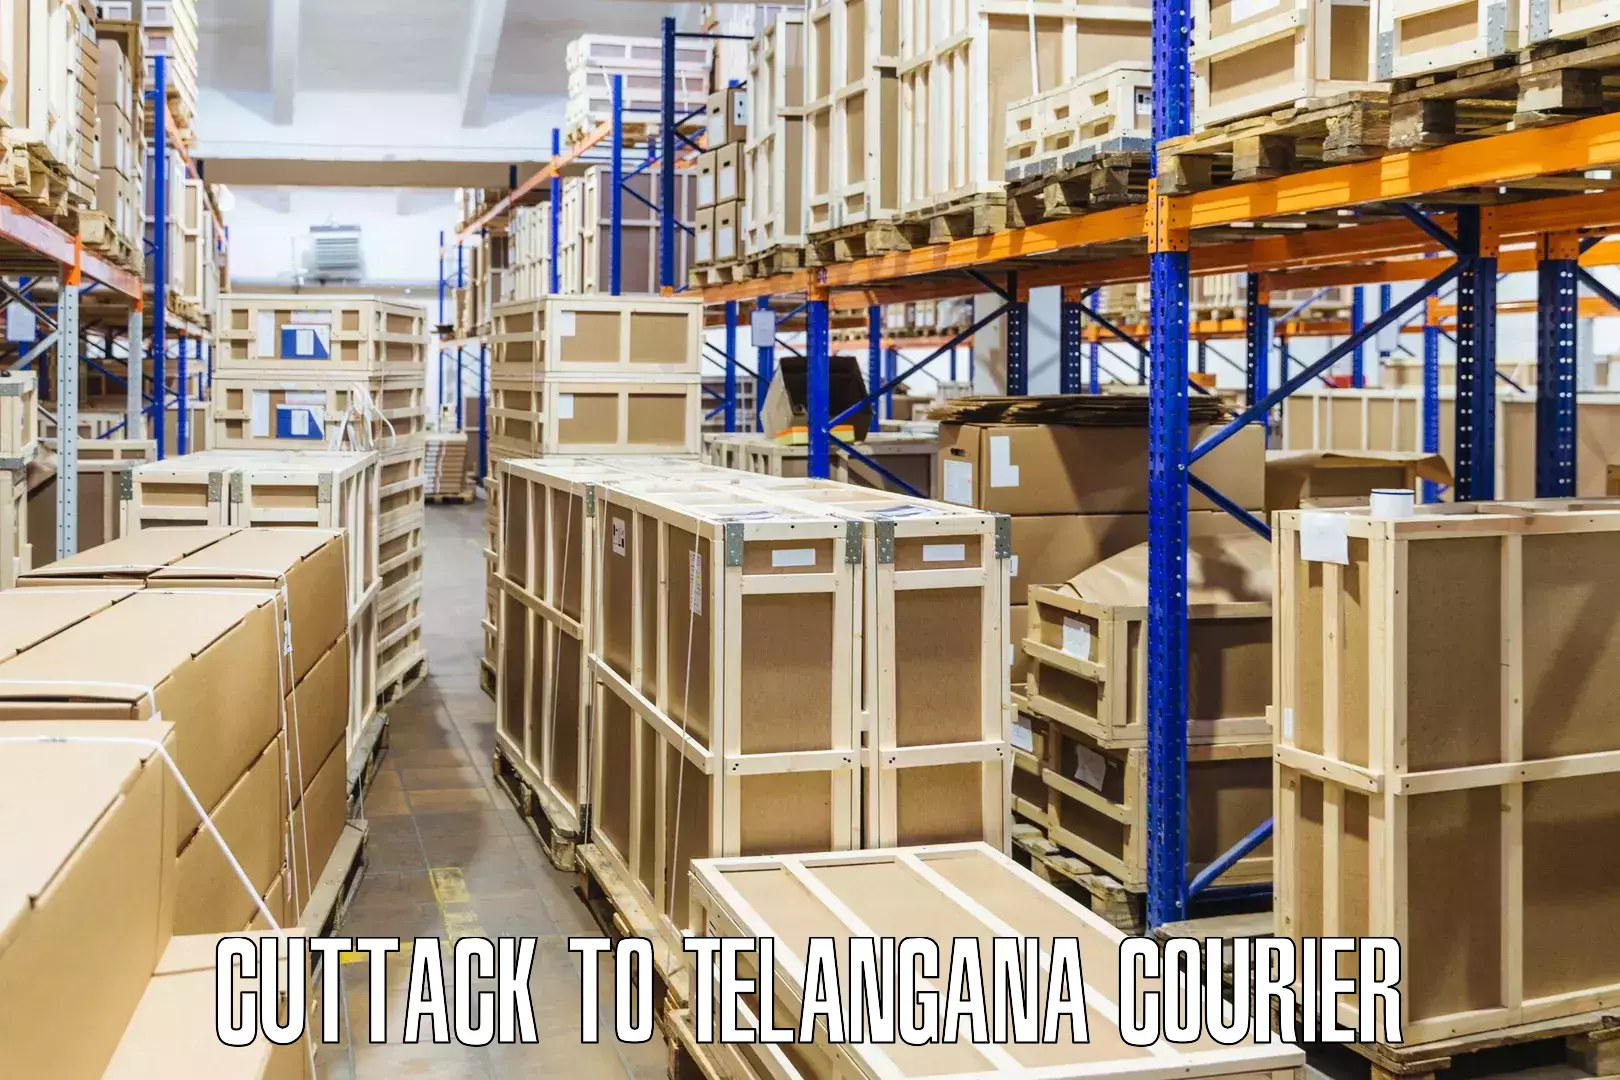 Courier dispatch services Cuttack to Telangana